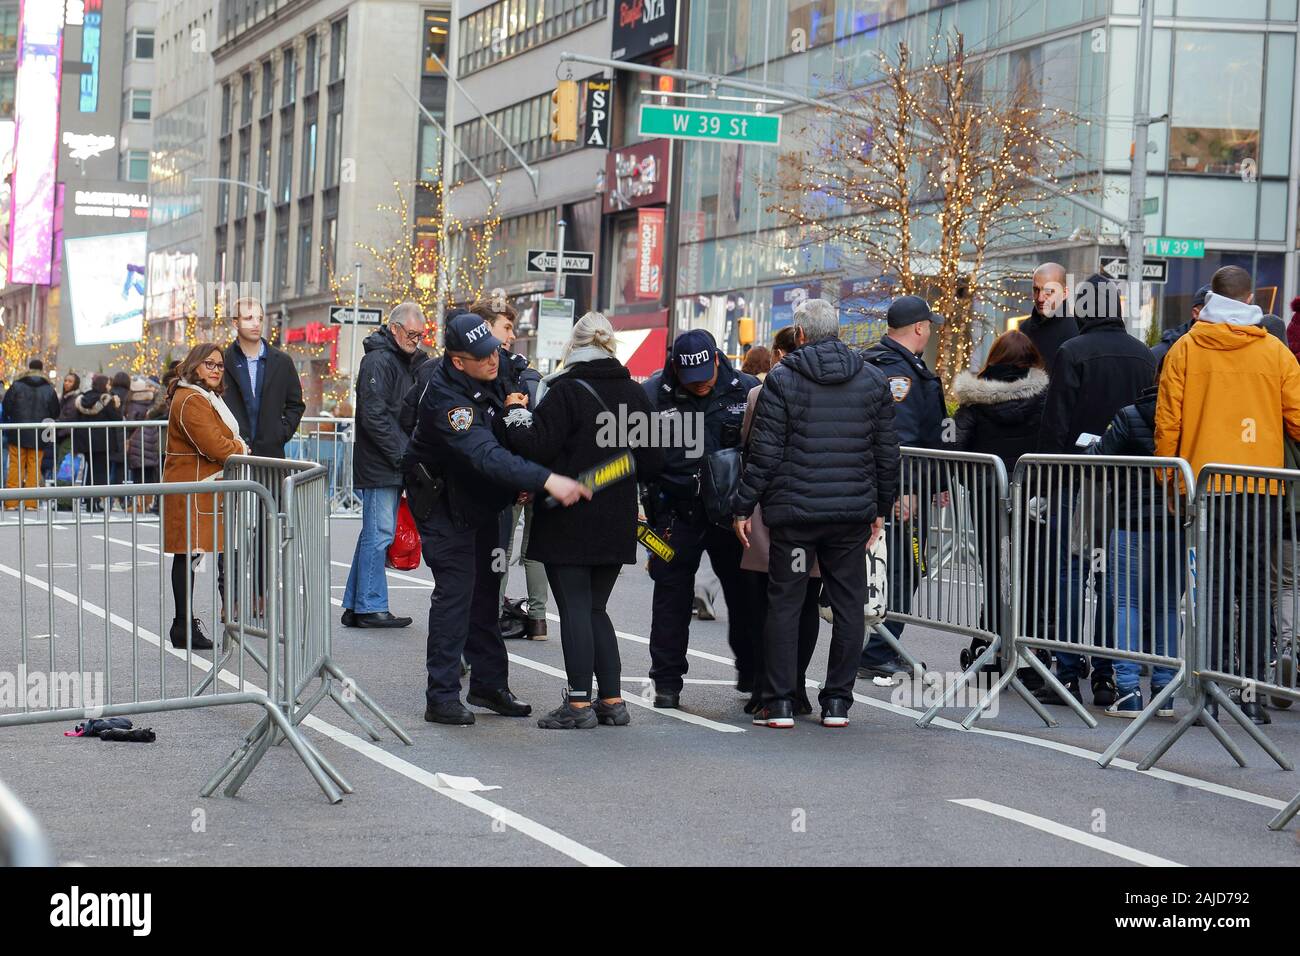 NYPD Counterterrorism police at a Times Square New Years Eve checkpoint check people with handheld metal detectors (New York, December 31, 2019) Stock Photo